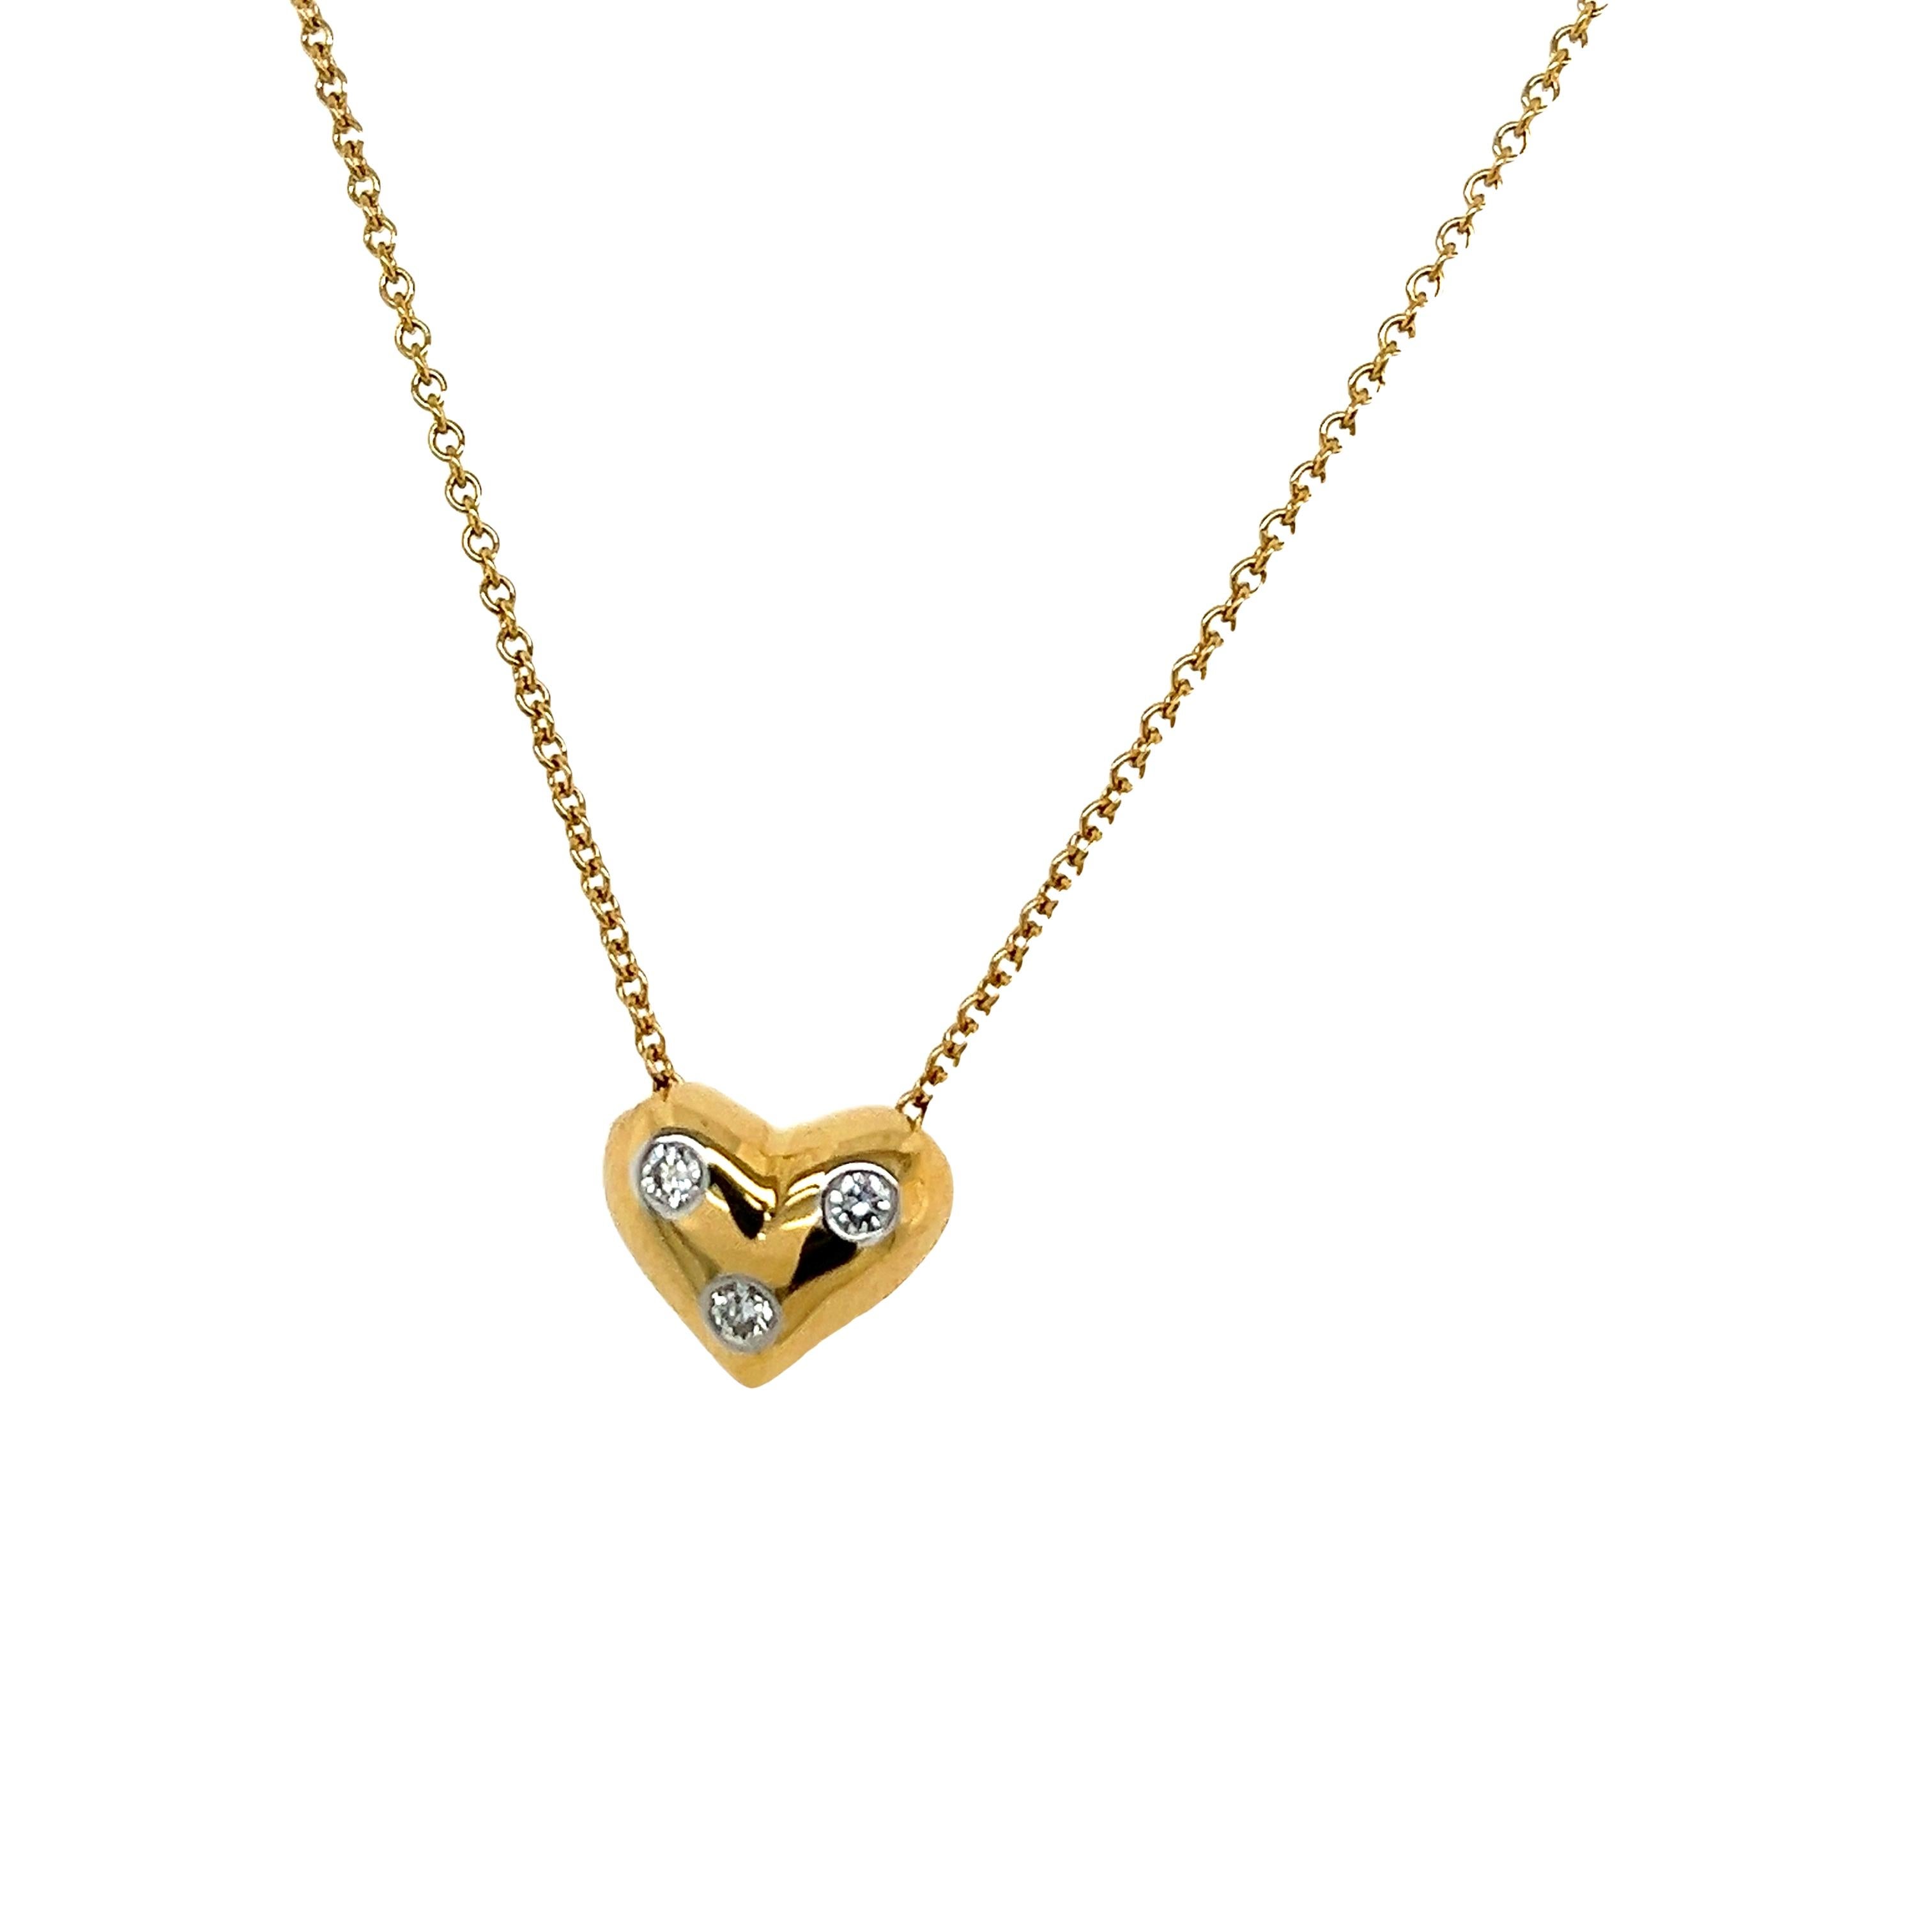 Introducing the breathtaking Tiffany & Co. Etoile Diamond Heart Pendant, a timeless symbol of love and elegance. Crafted with meticulous attention to detail, this exquisite pendant features a delicate heart-shaped design adorned with dazzling round